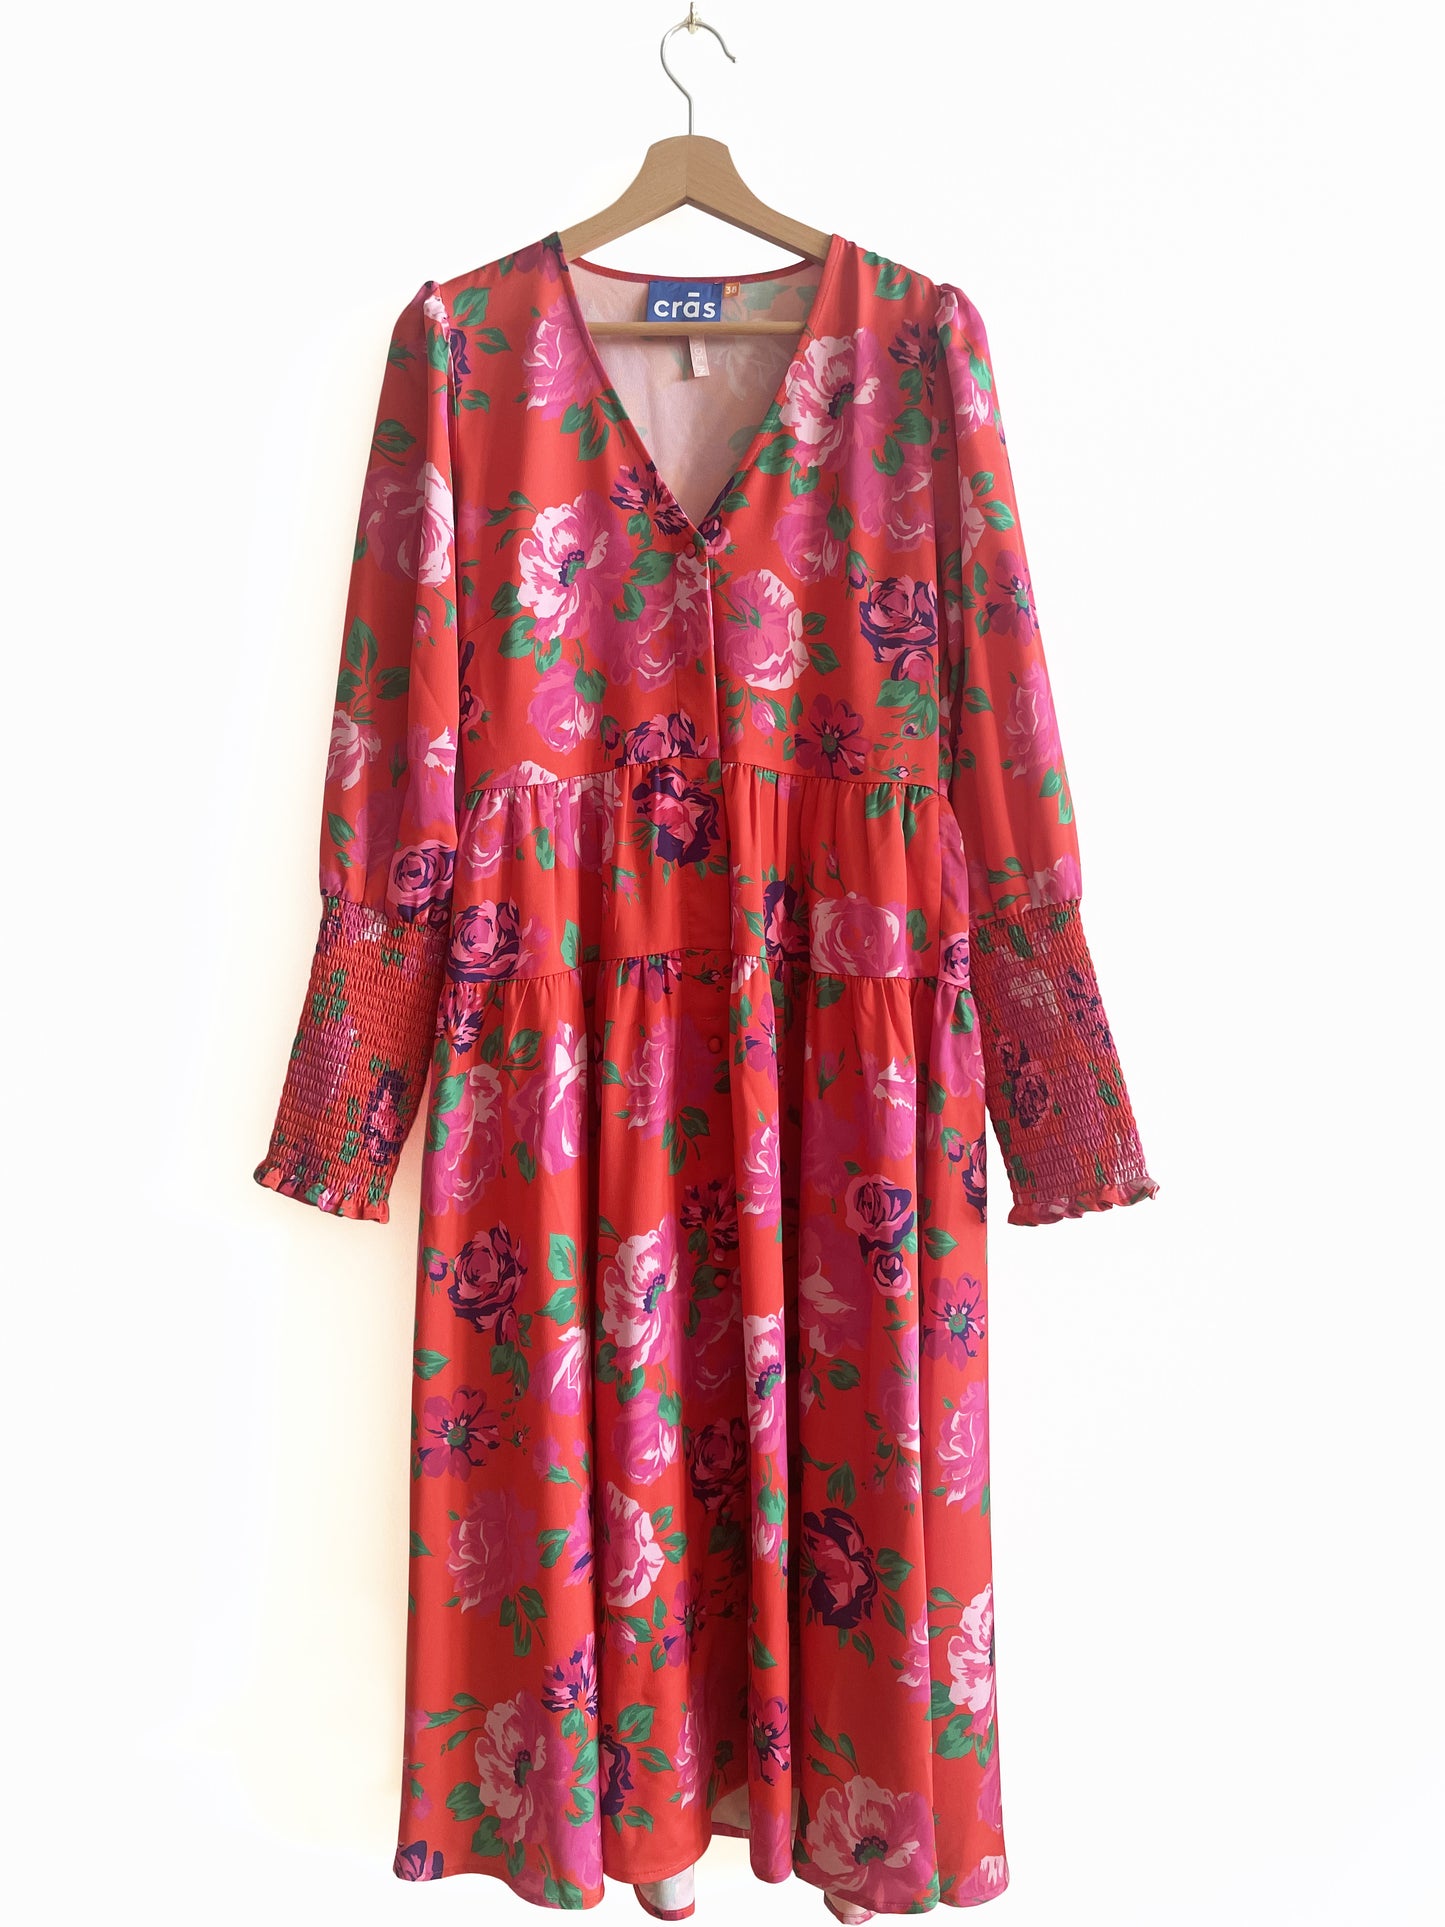 Floral dress, with smock details on cuff, Sizes S, L